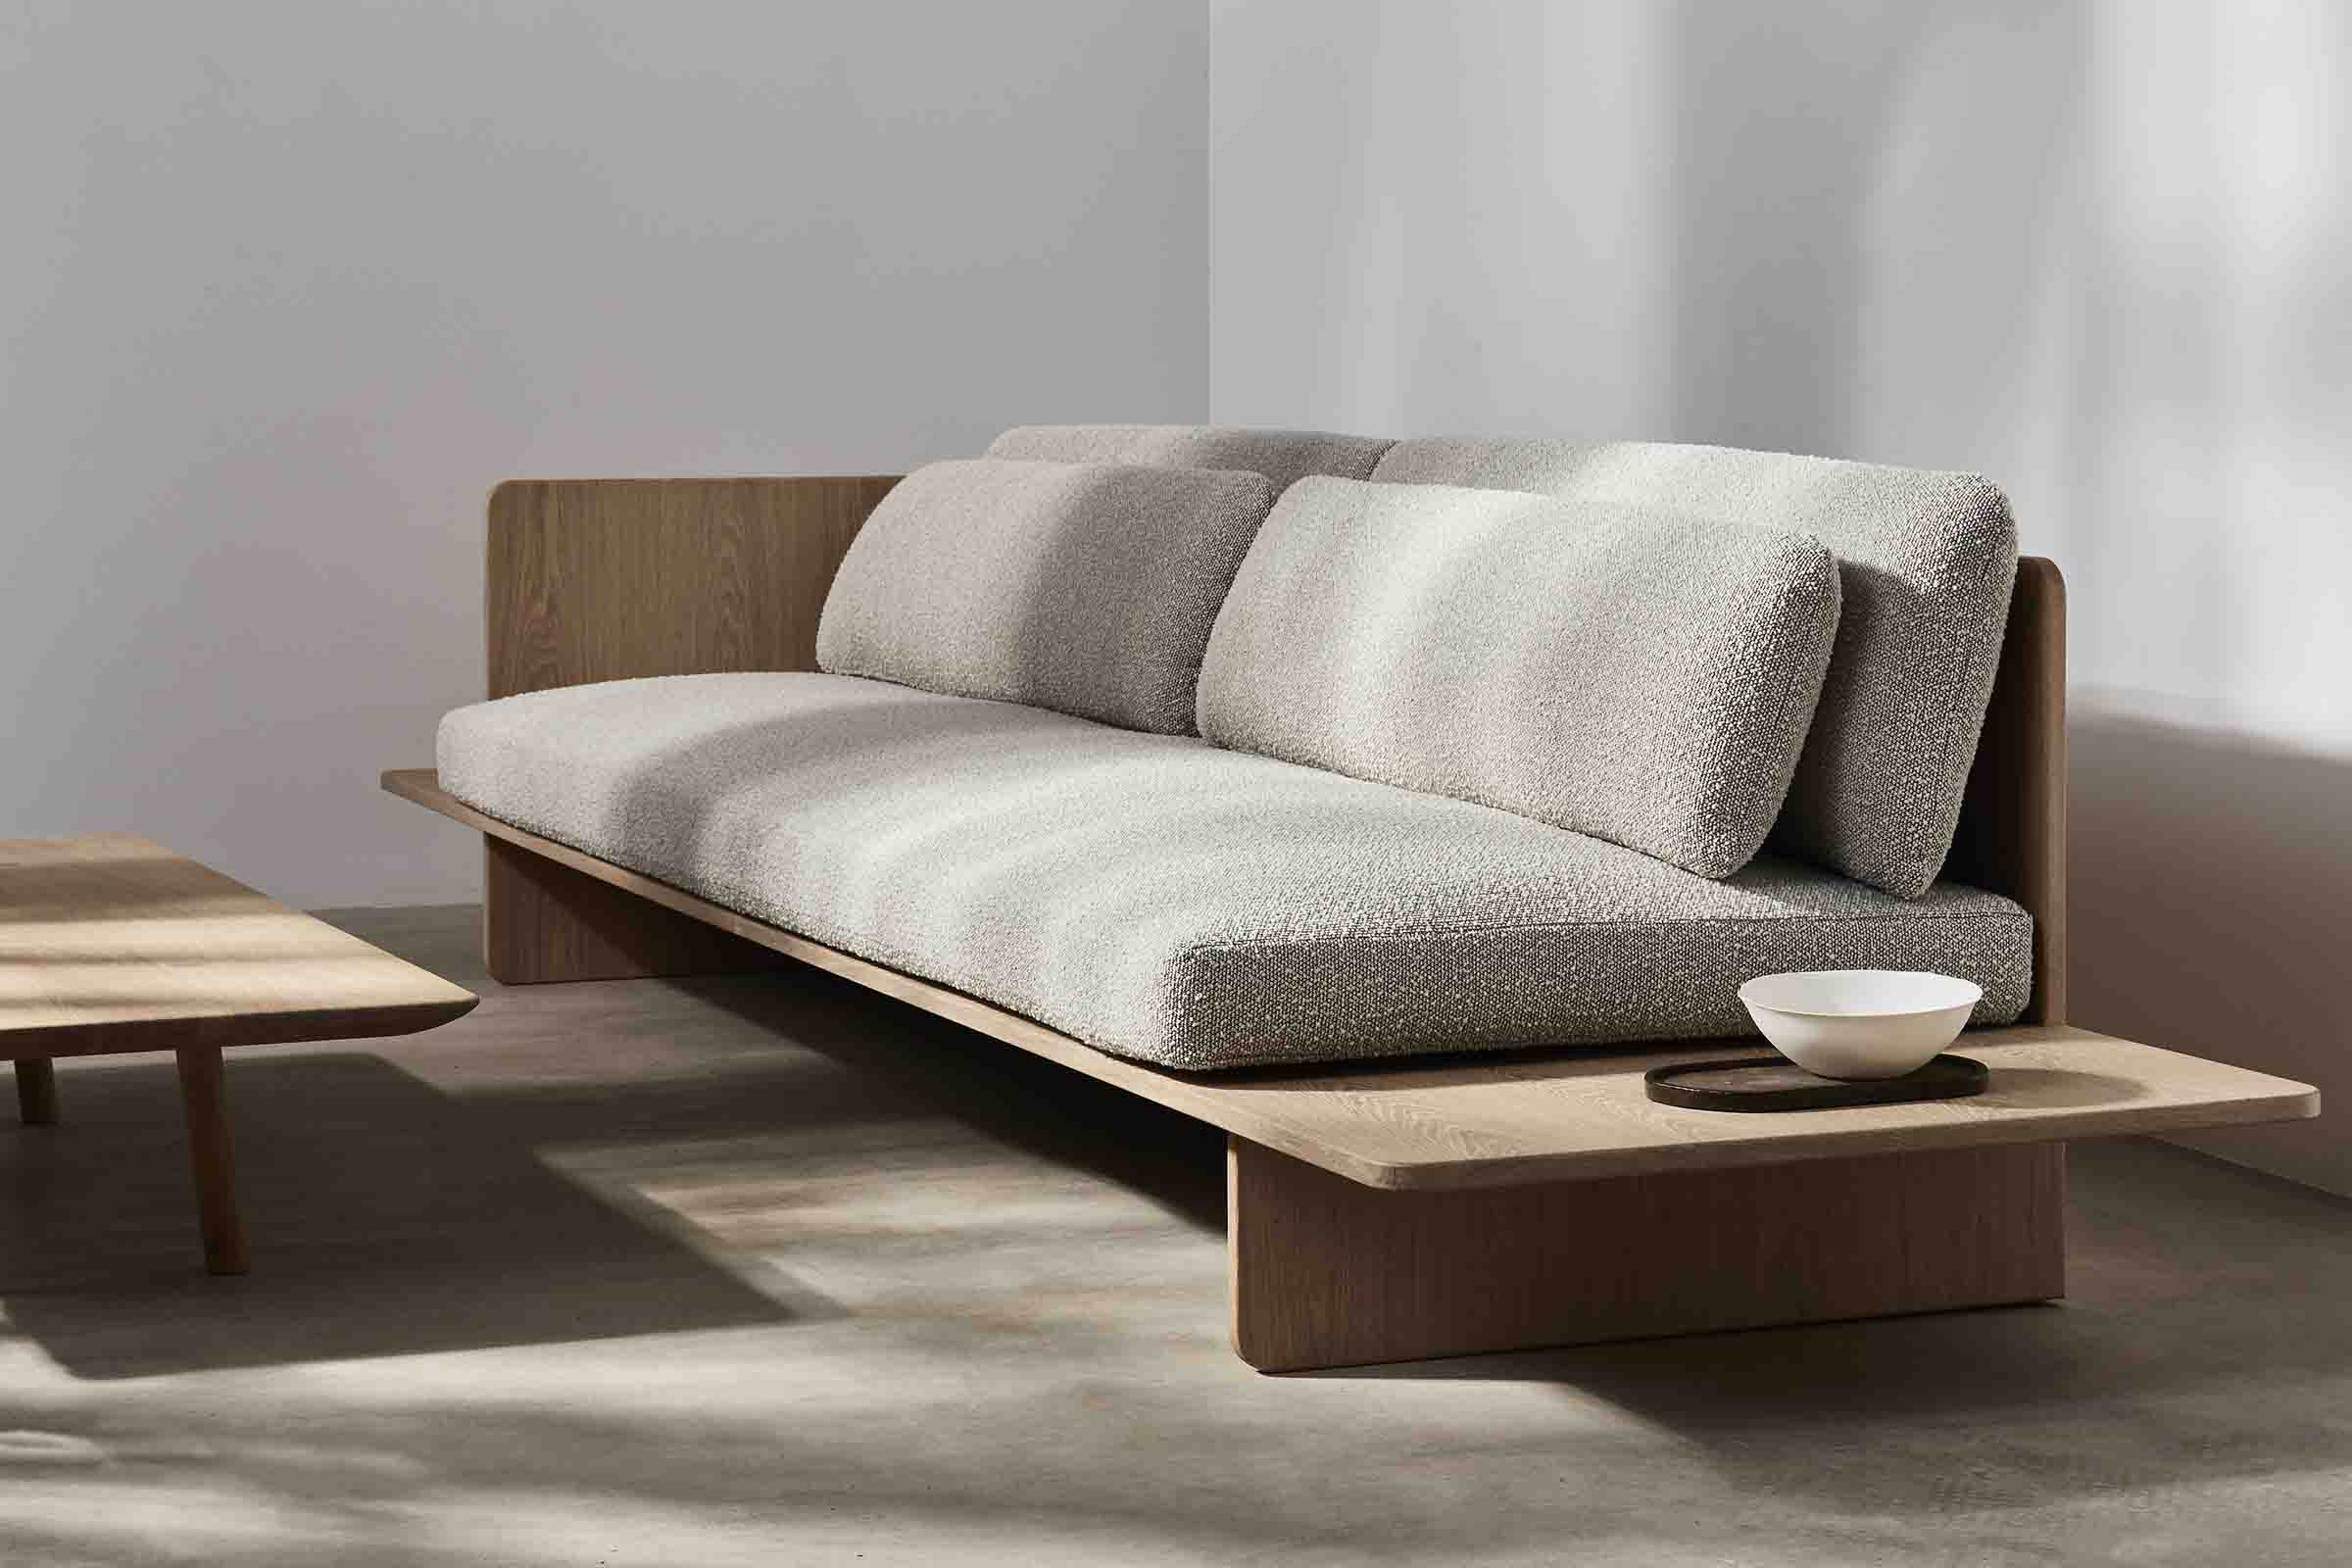 Cosy and relaxed sofa for lounging